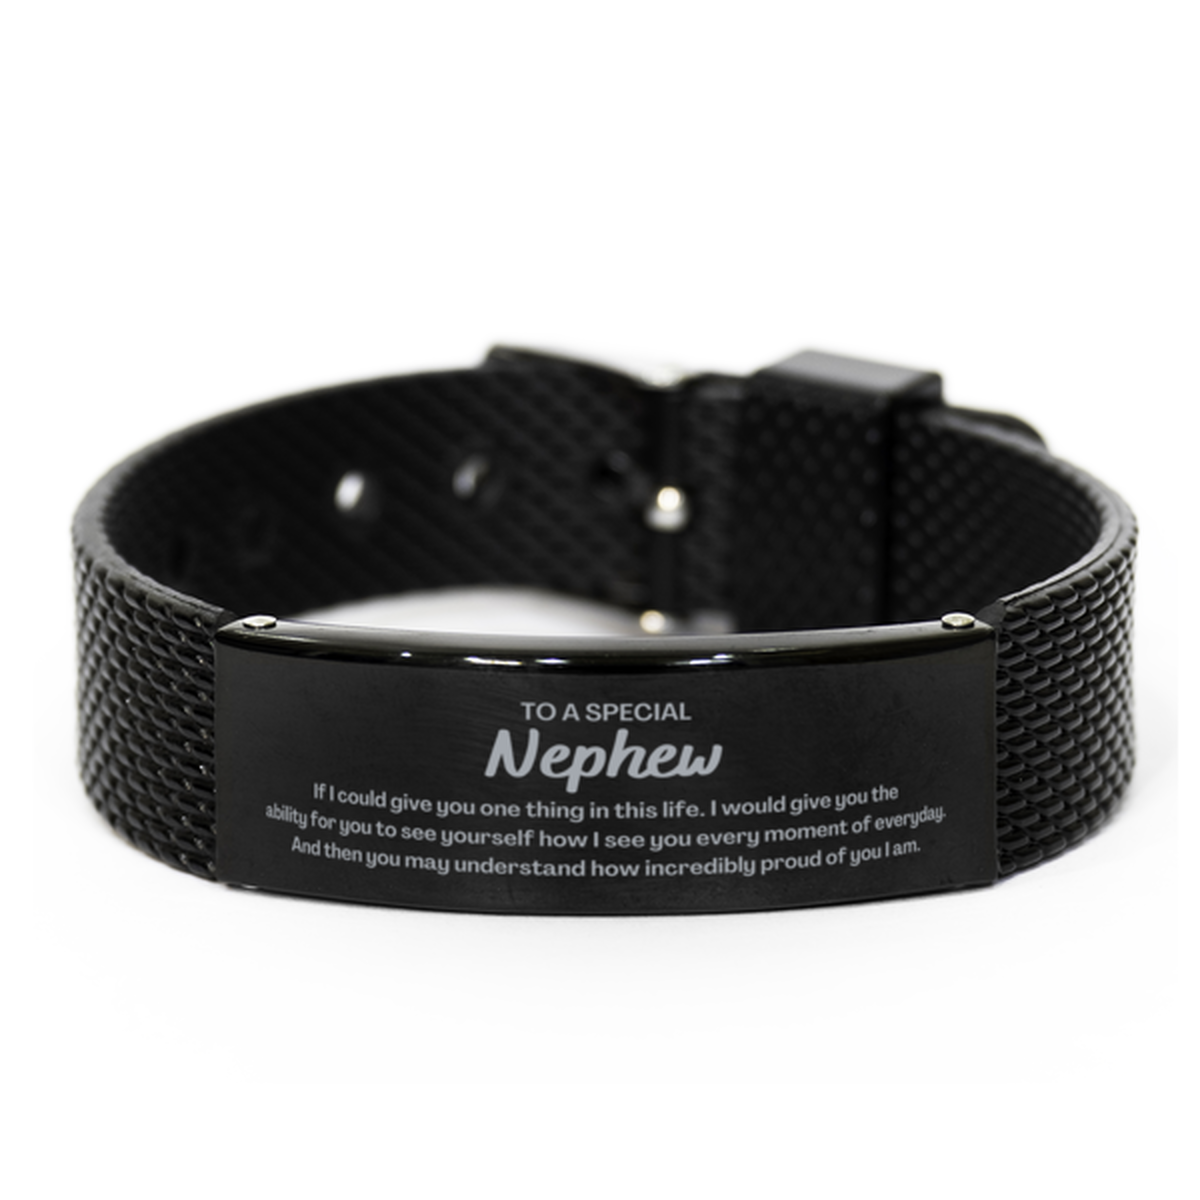 To My Nephew Black Shark Mesh Bracelet, Gifts For Nephew Engraved, Inspirational Gifts for Christmas Birthday, Epic Gifts for Nephew To A Special Nephew how incredibly proud of you I am